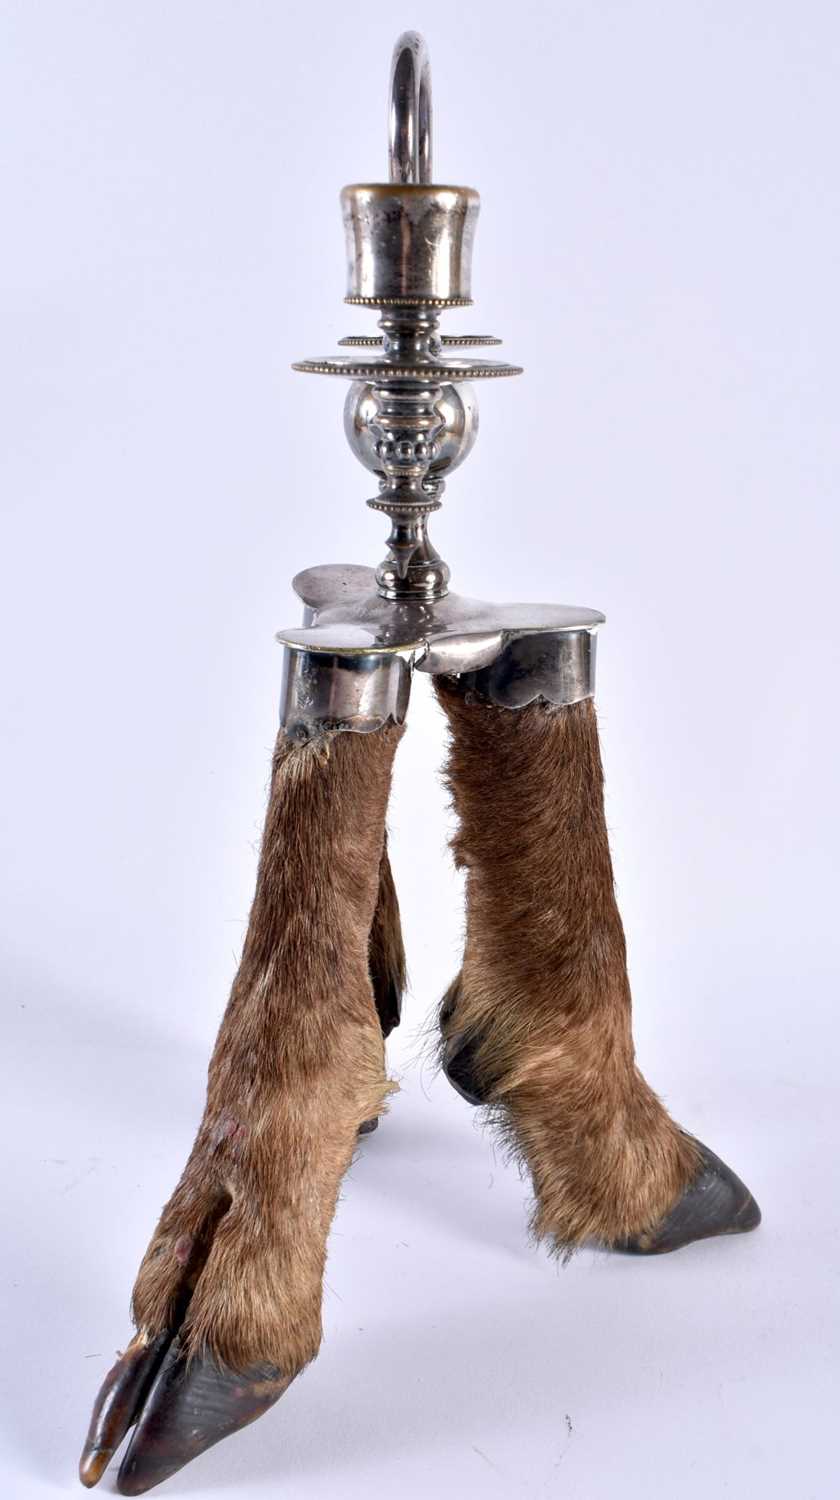 A RARE VICTORIAN TAXIDERMY ROWLAND WARD CANDLESTICK formed with three deer hooves. 32 cm x 16 cm. - Image 3 of 6